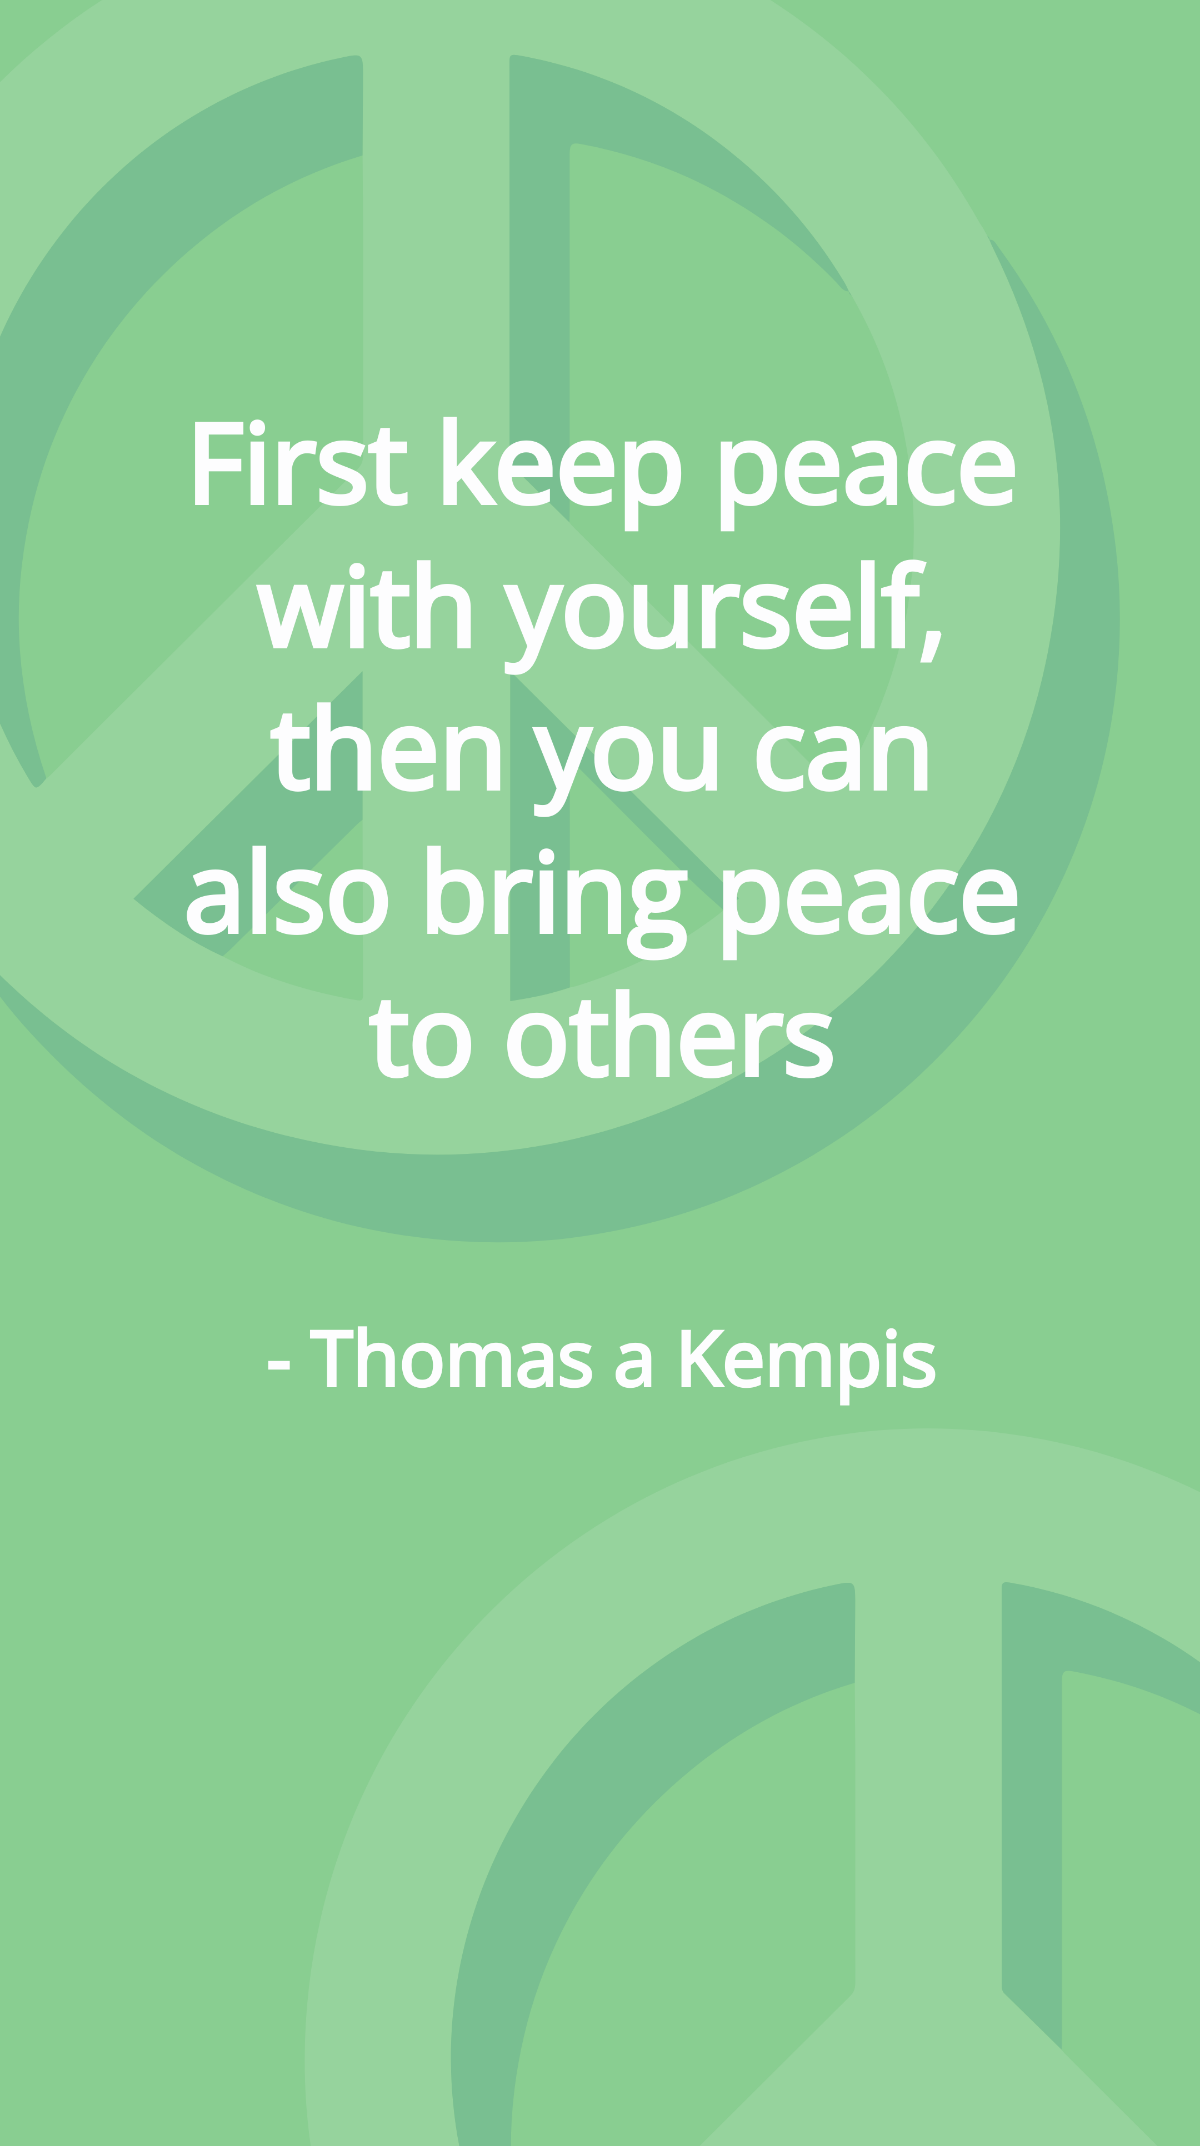 Thomas a Kempis - First keep peace with yourself, then you can also bring peace to others